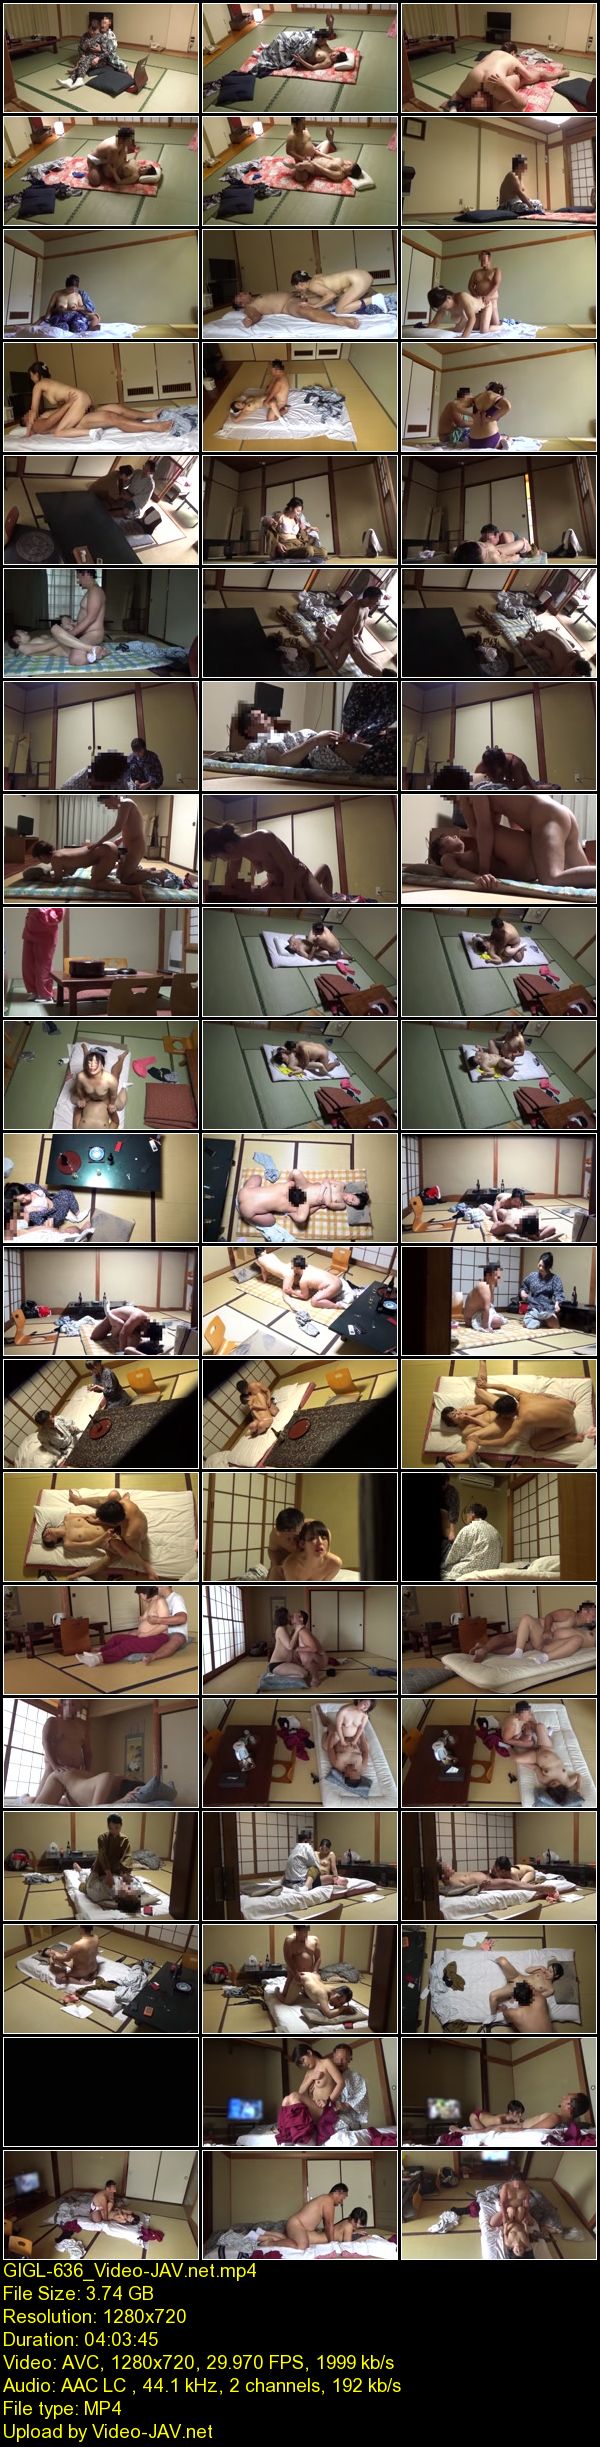 Download Japanese Adult Video [GIGL 636] 盗撮 温泉仲居  2 2021 02 26